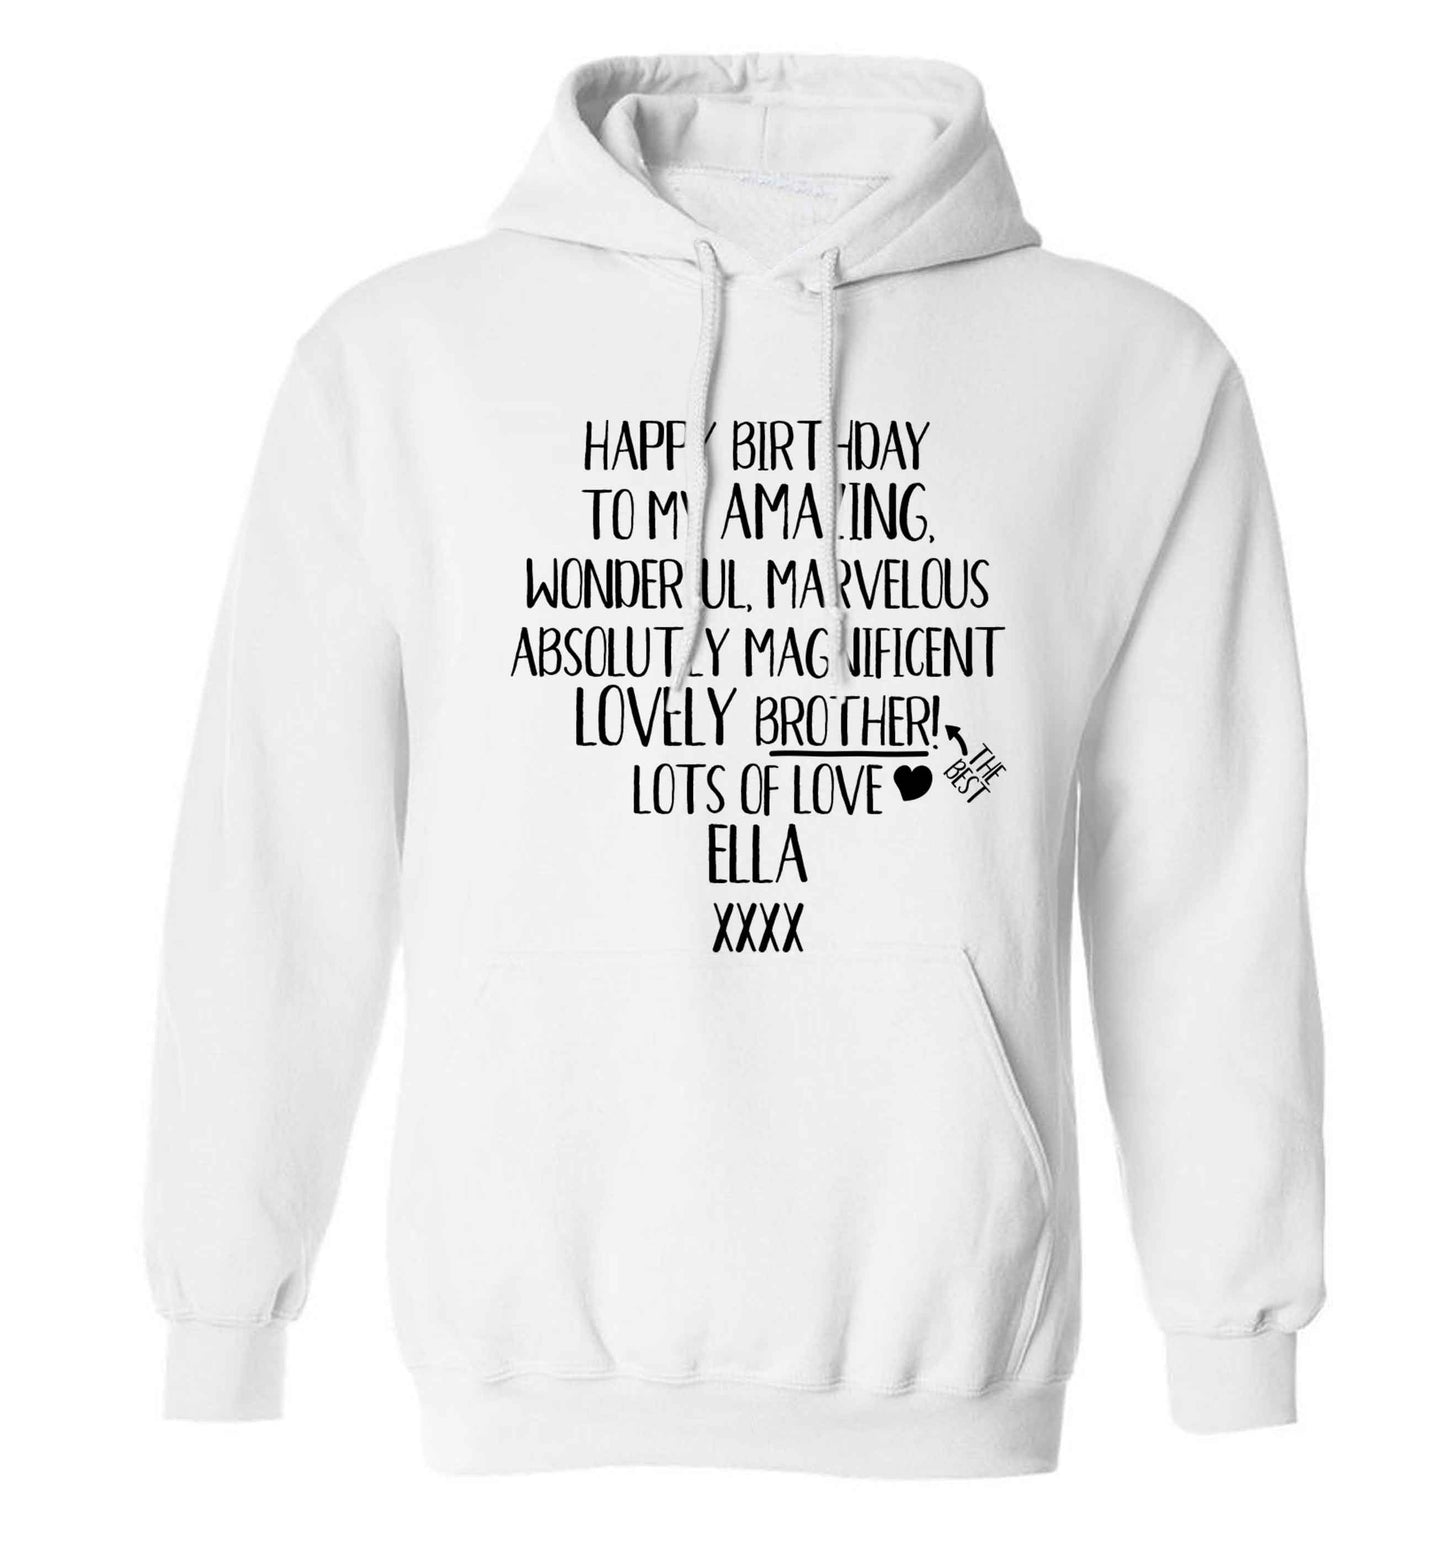 Personalised happy birthday to my amazing, wonderful, lovely brother adults unisex white hoodie 2XL